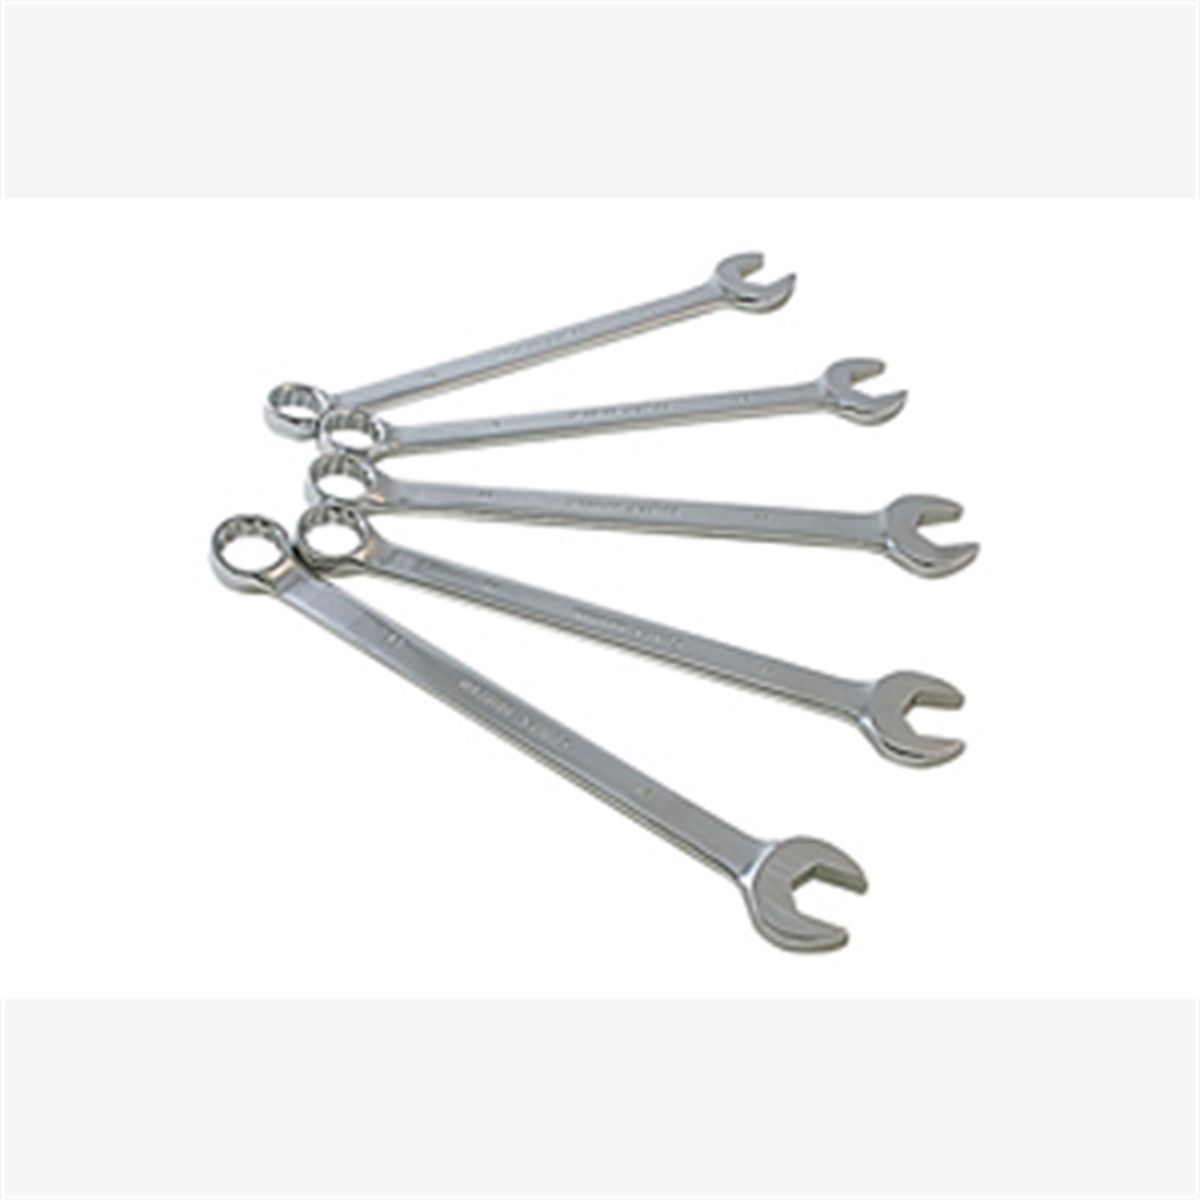 5 piece V-Groove Metric Combination Wrench Set